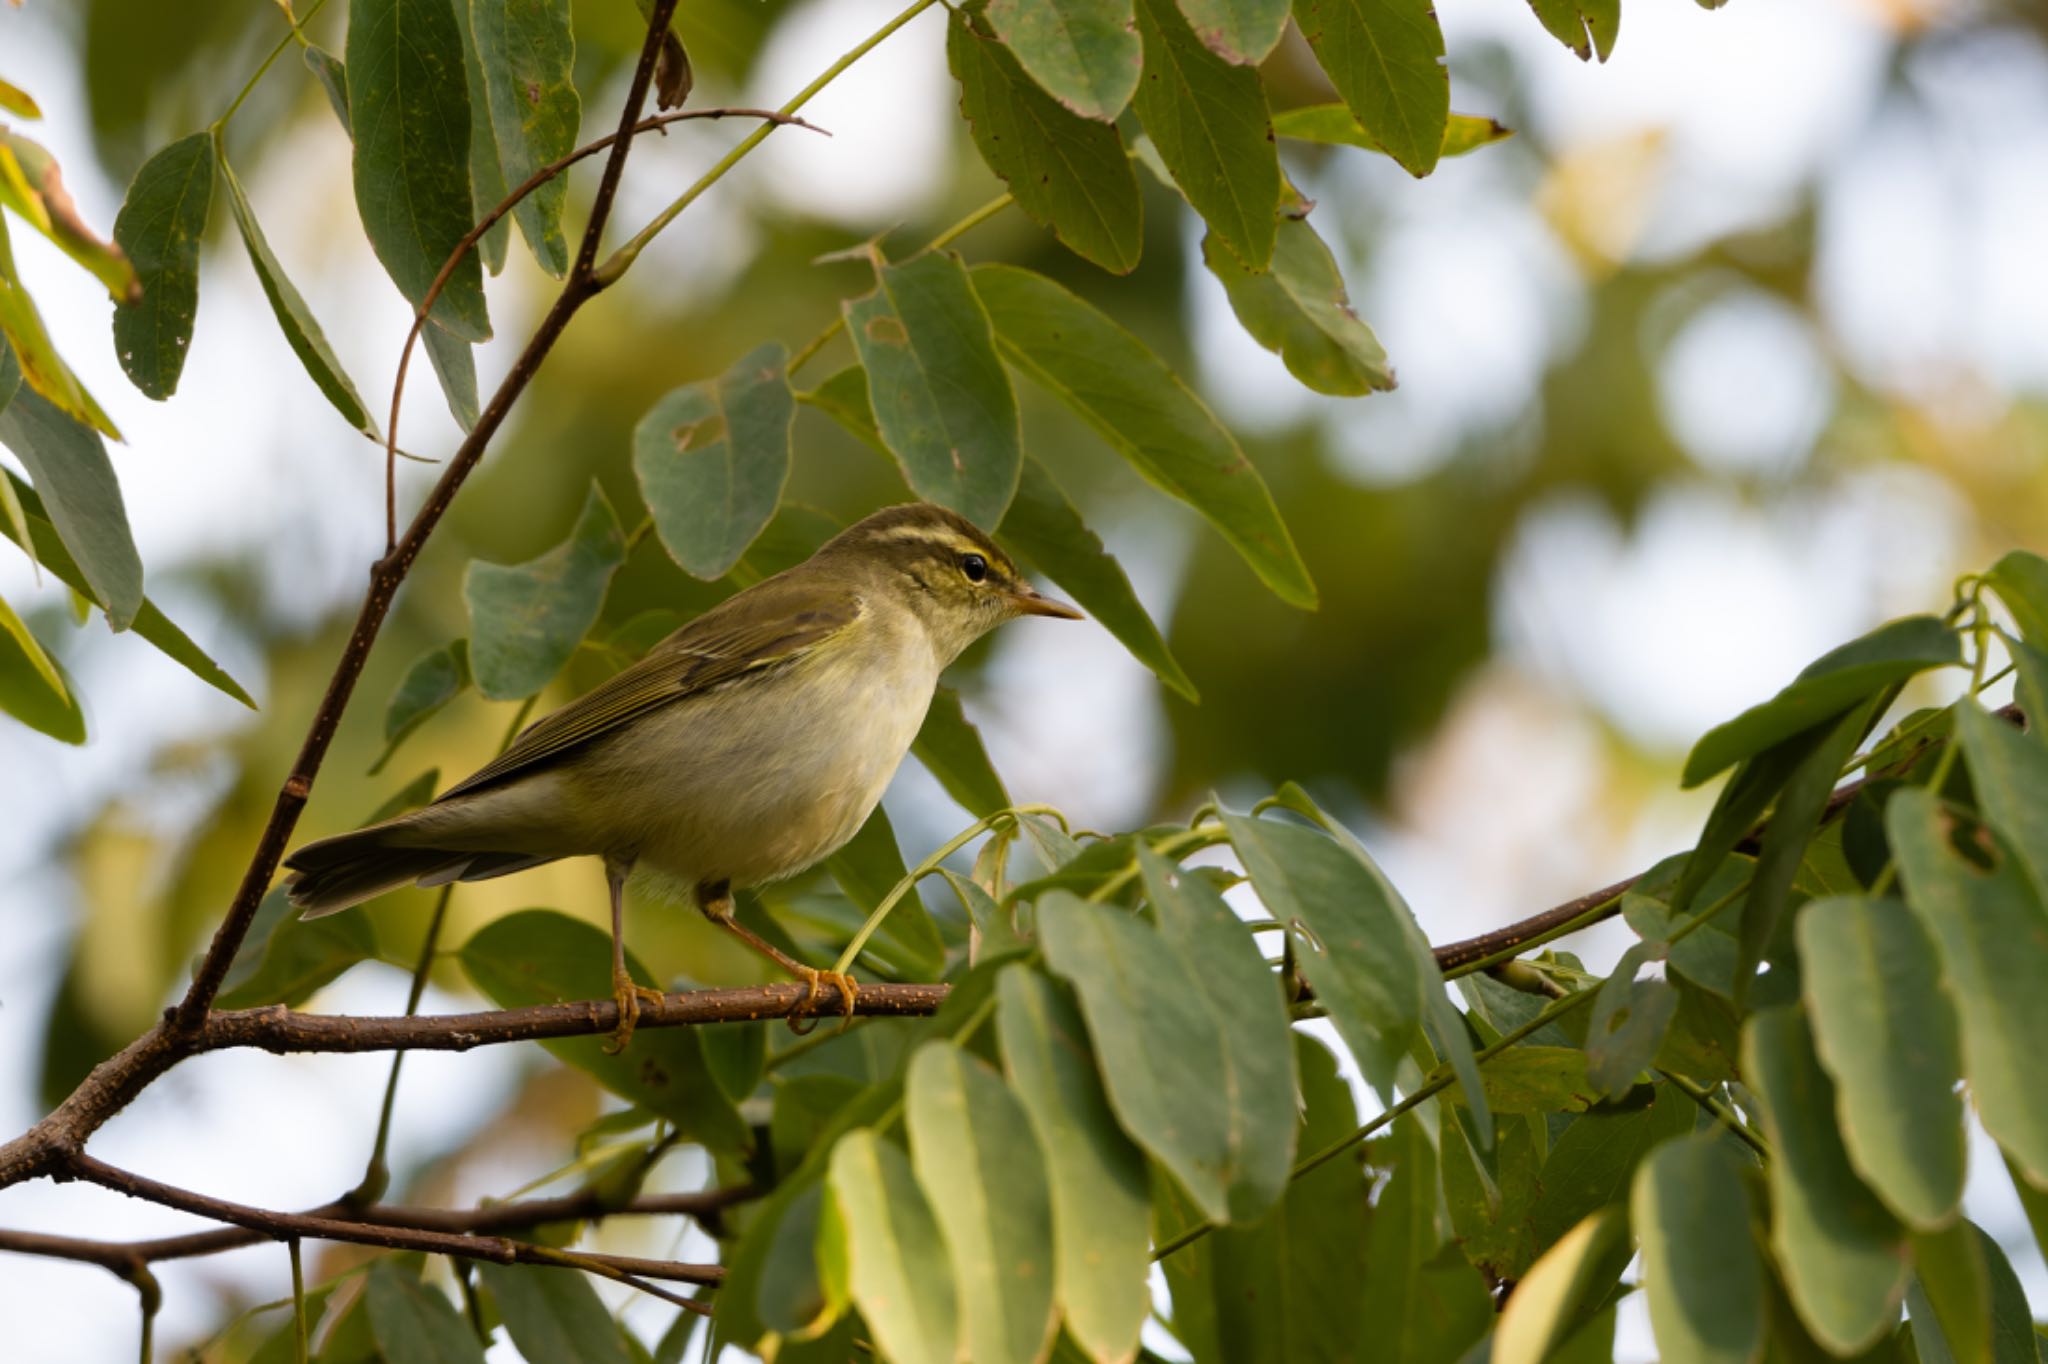 Photo of Japanese Leaf Warbler at 新潟市西区 by ぽちゃっこ